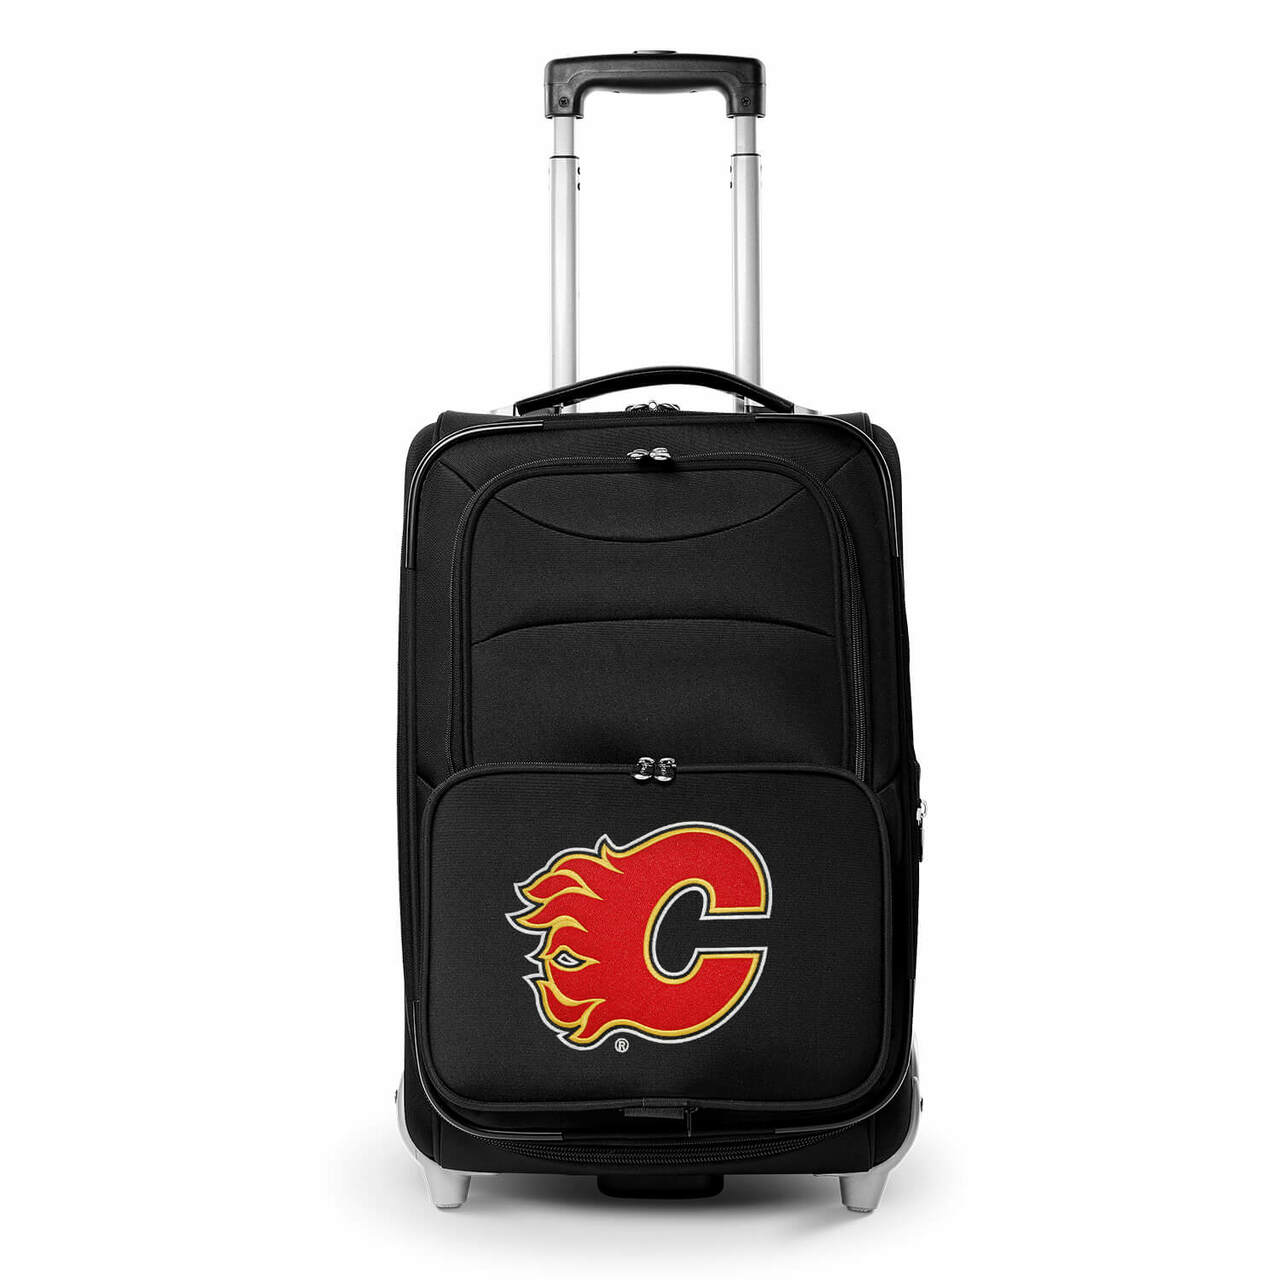 Flames Carry On Luggage | Calgary Flames Rolling Carry On Luggage